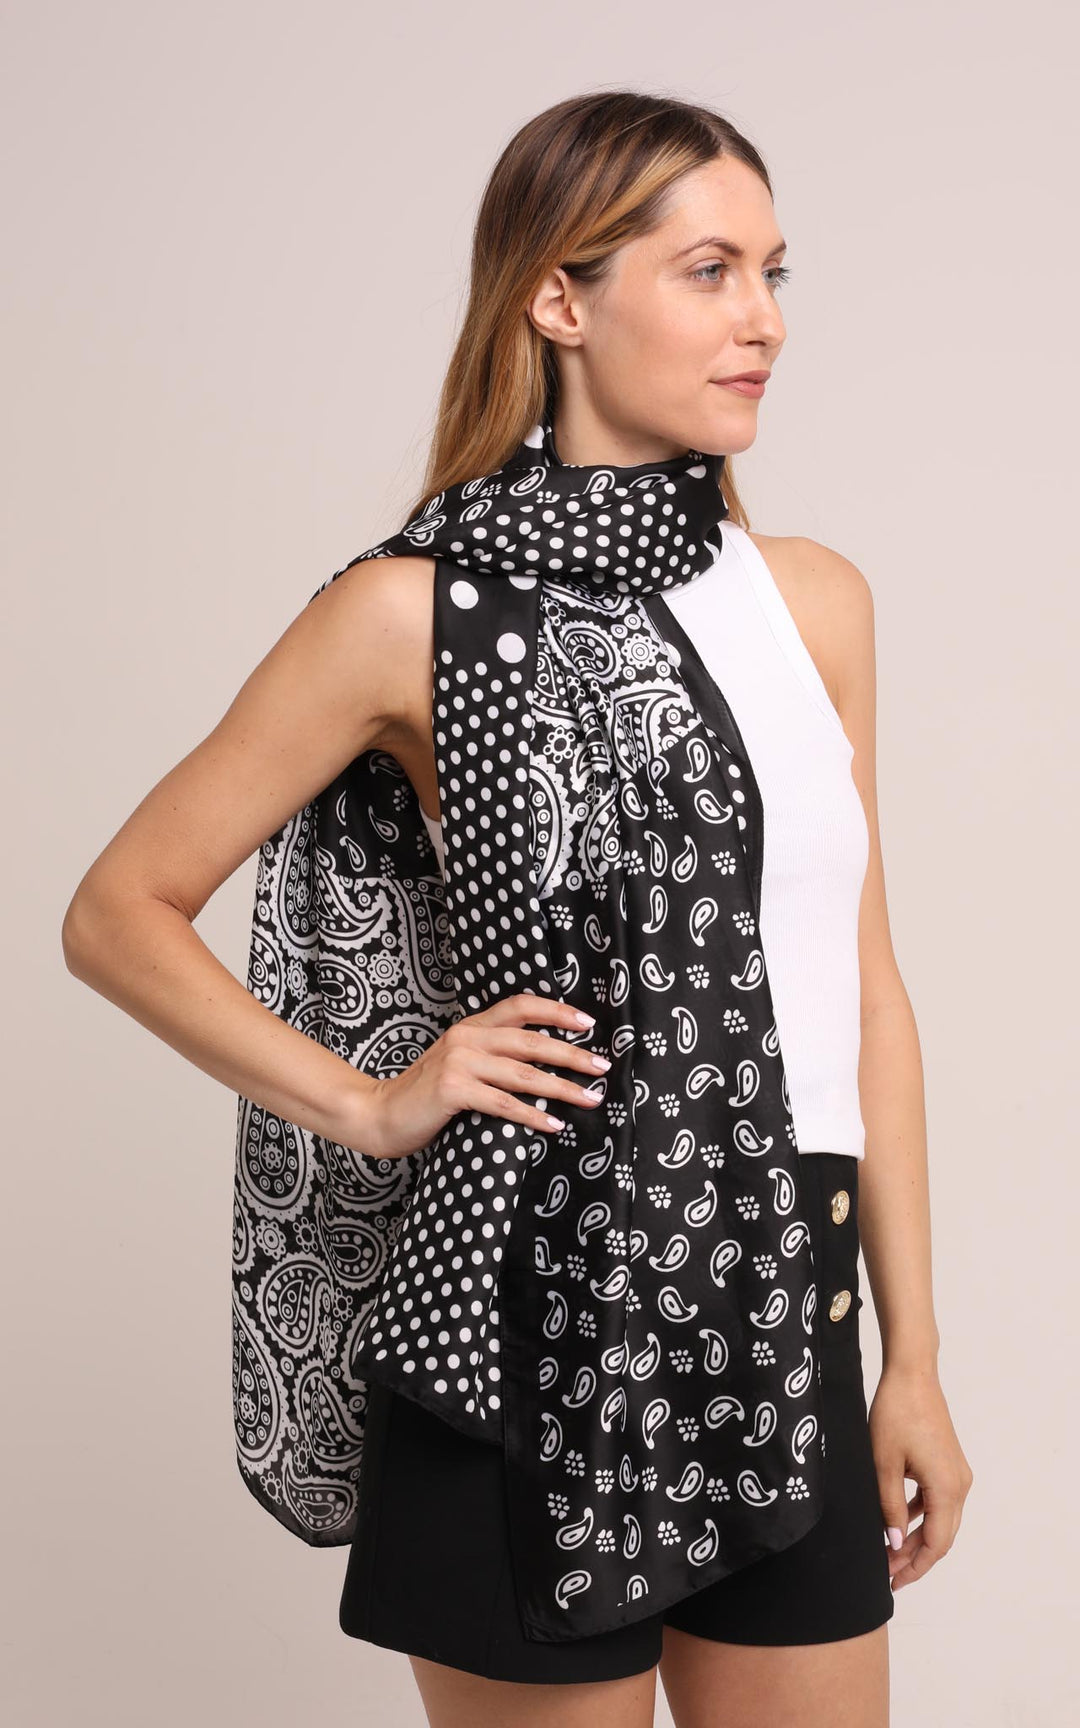 Silk Scarf in Black and White Paisley & Polka Dots